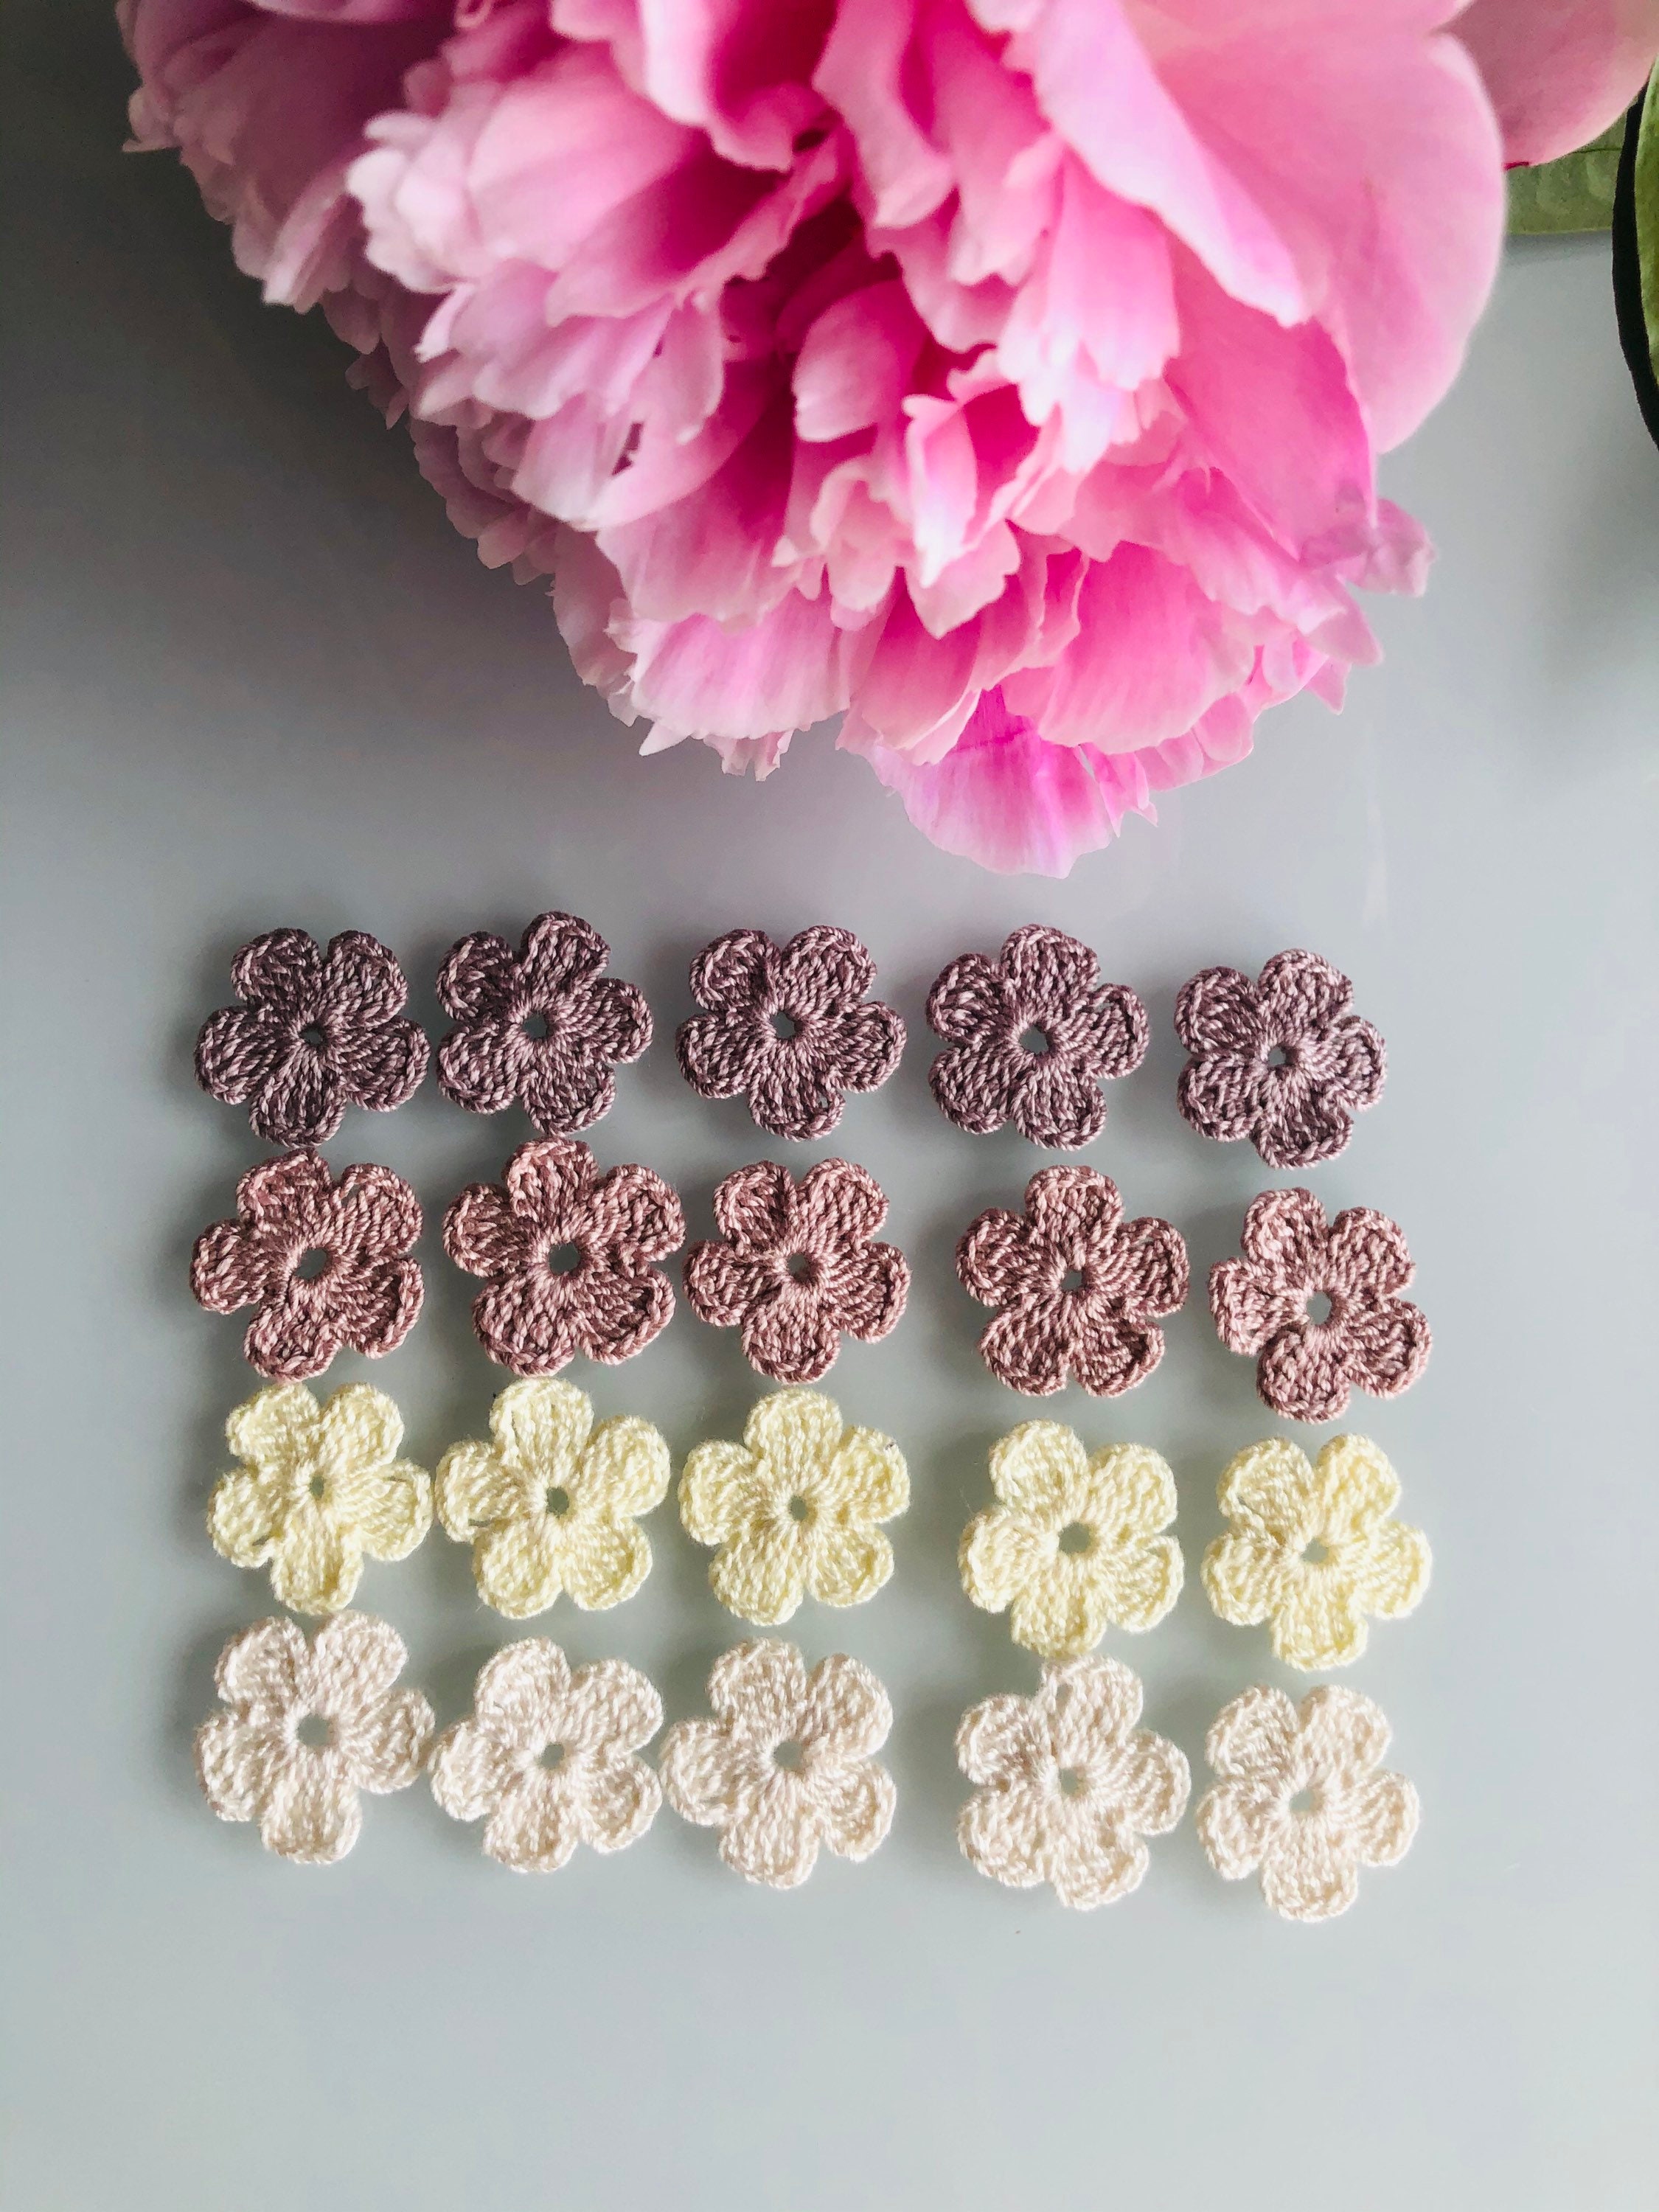 embellishments,scrapbooking,sewing Set of 20 small hand crochet flowers appliqu\u00e9 in neutral colours jewellery making,card making